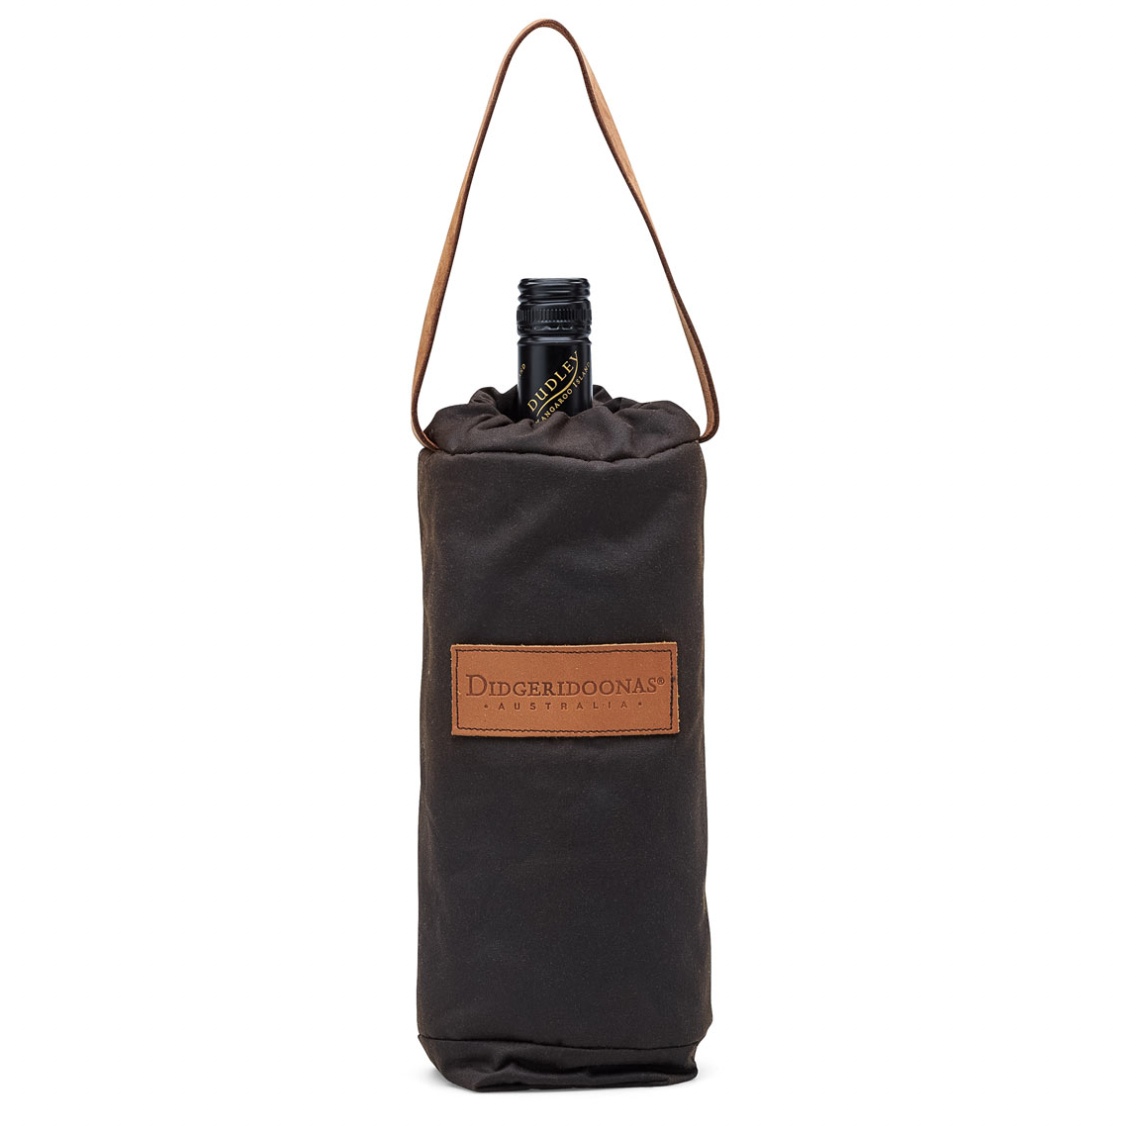 The Woolly Wine Cooler is not just practical; it's stylish too. The tough leather carry strap adds a touch of sophistication while making it easy to transport your wine to the barbie, picnic, or BYO restaurant.